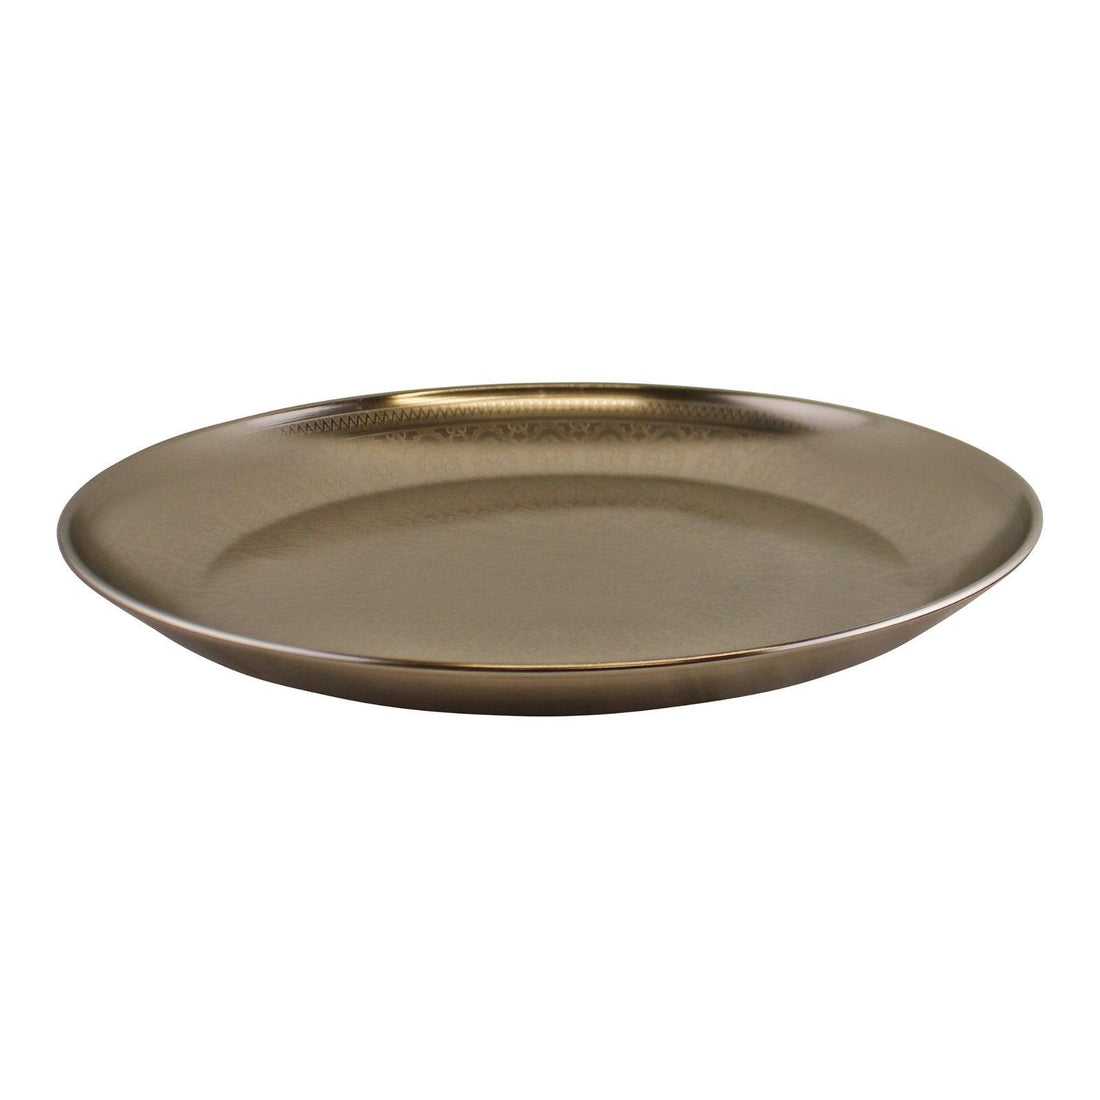 Decorative Silver Metal Tray With Etched Design - £22.99 - Bowls & Plates 